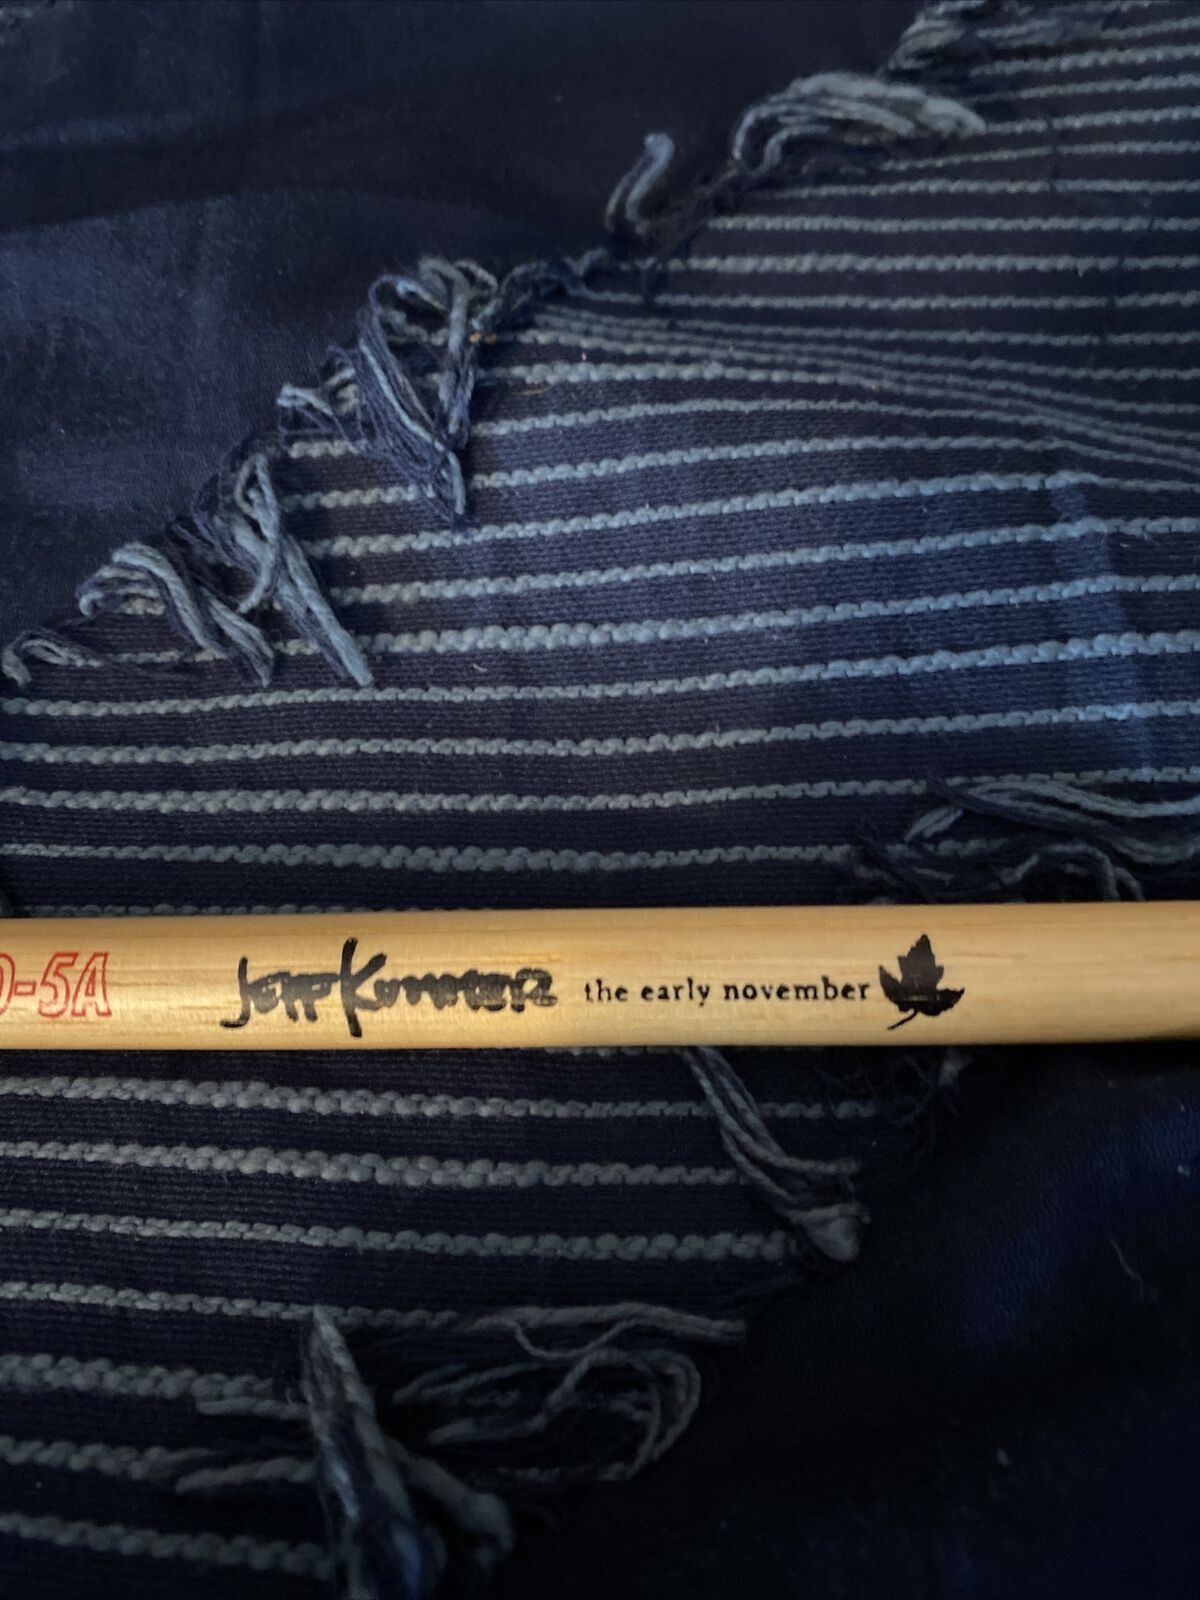 New The Early November Jeff Kummer Vater XD-5A Signature Drum St